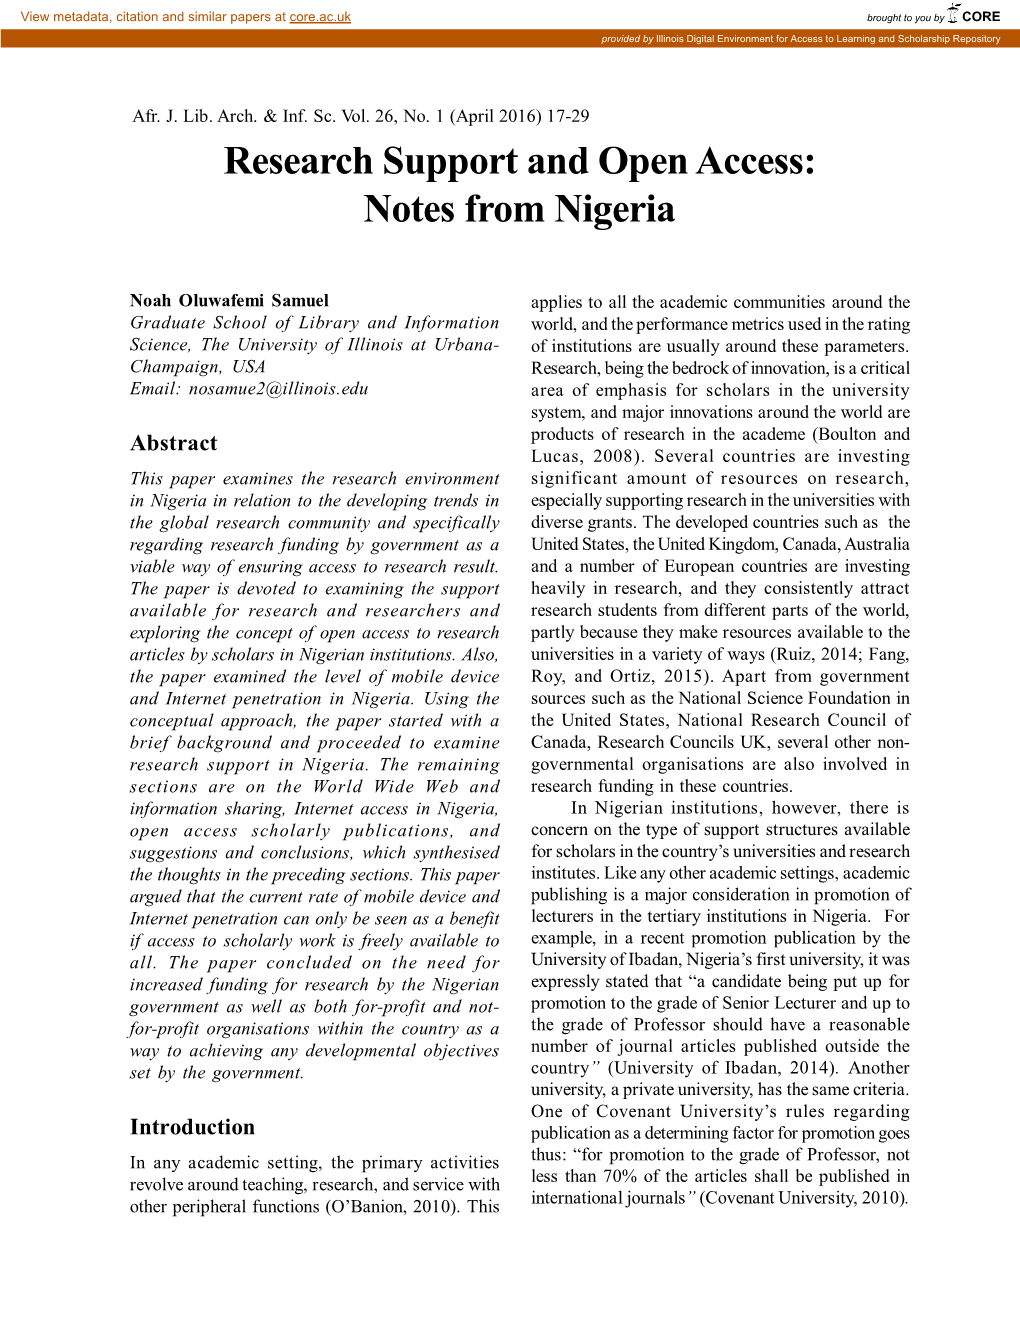 Research Support and Open Access: Notes from Nigeria